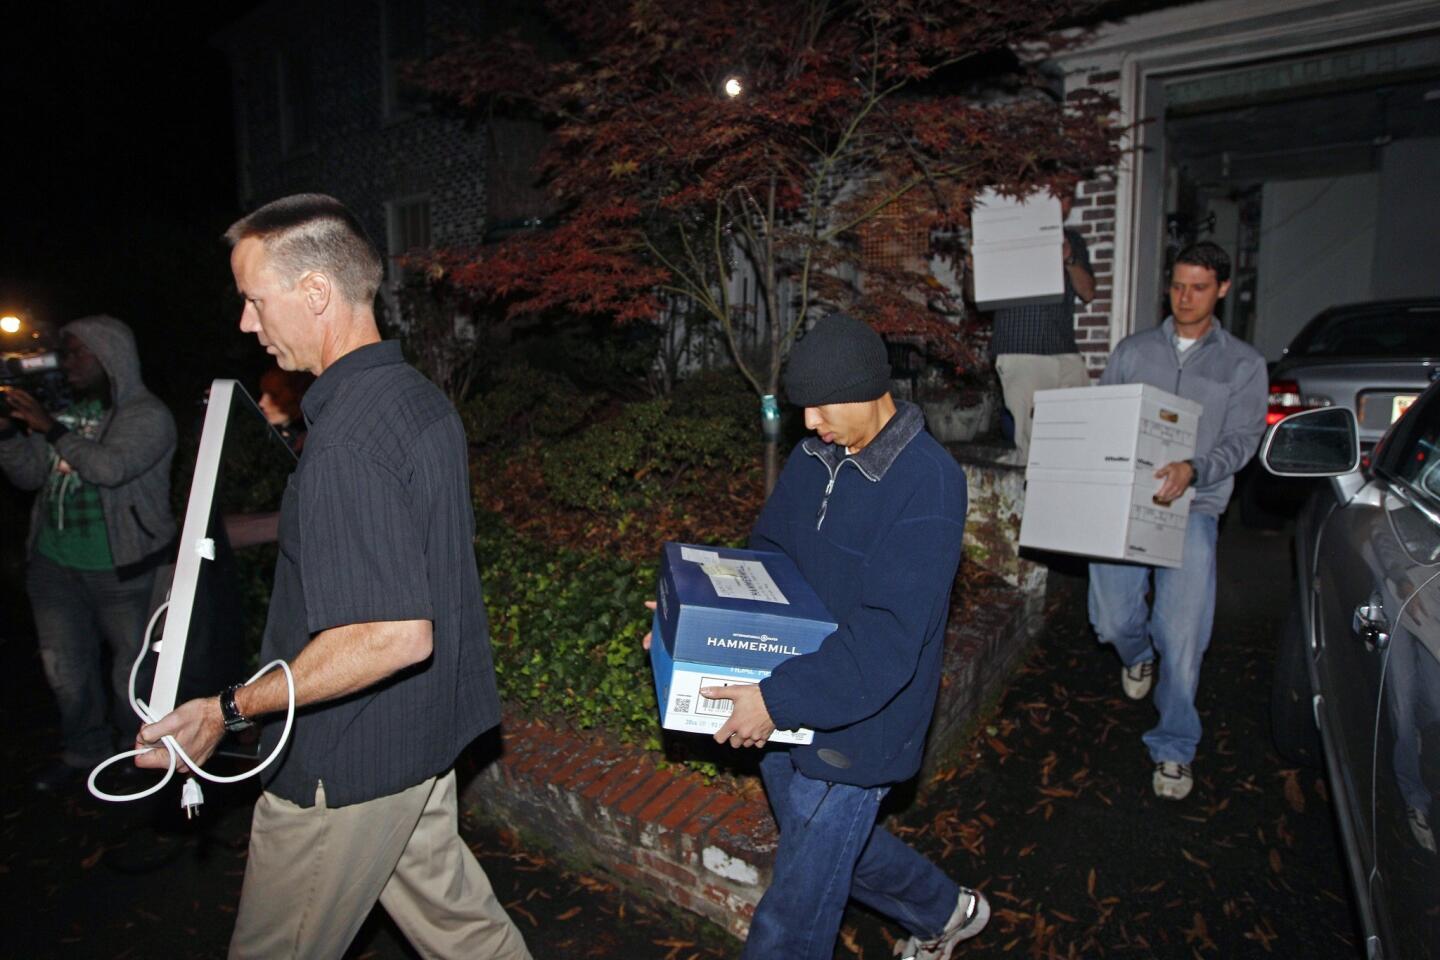 FBI agents carry boxes and a computer Tuesday from the home of Paula Broadwell, the woman whose alleged affair with retired Gen. David Petraeus led to his resignation as CIA director, in the Dilworth neighborhood of Charlotte, N.C.